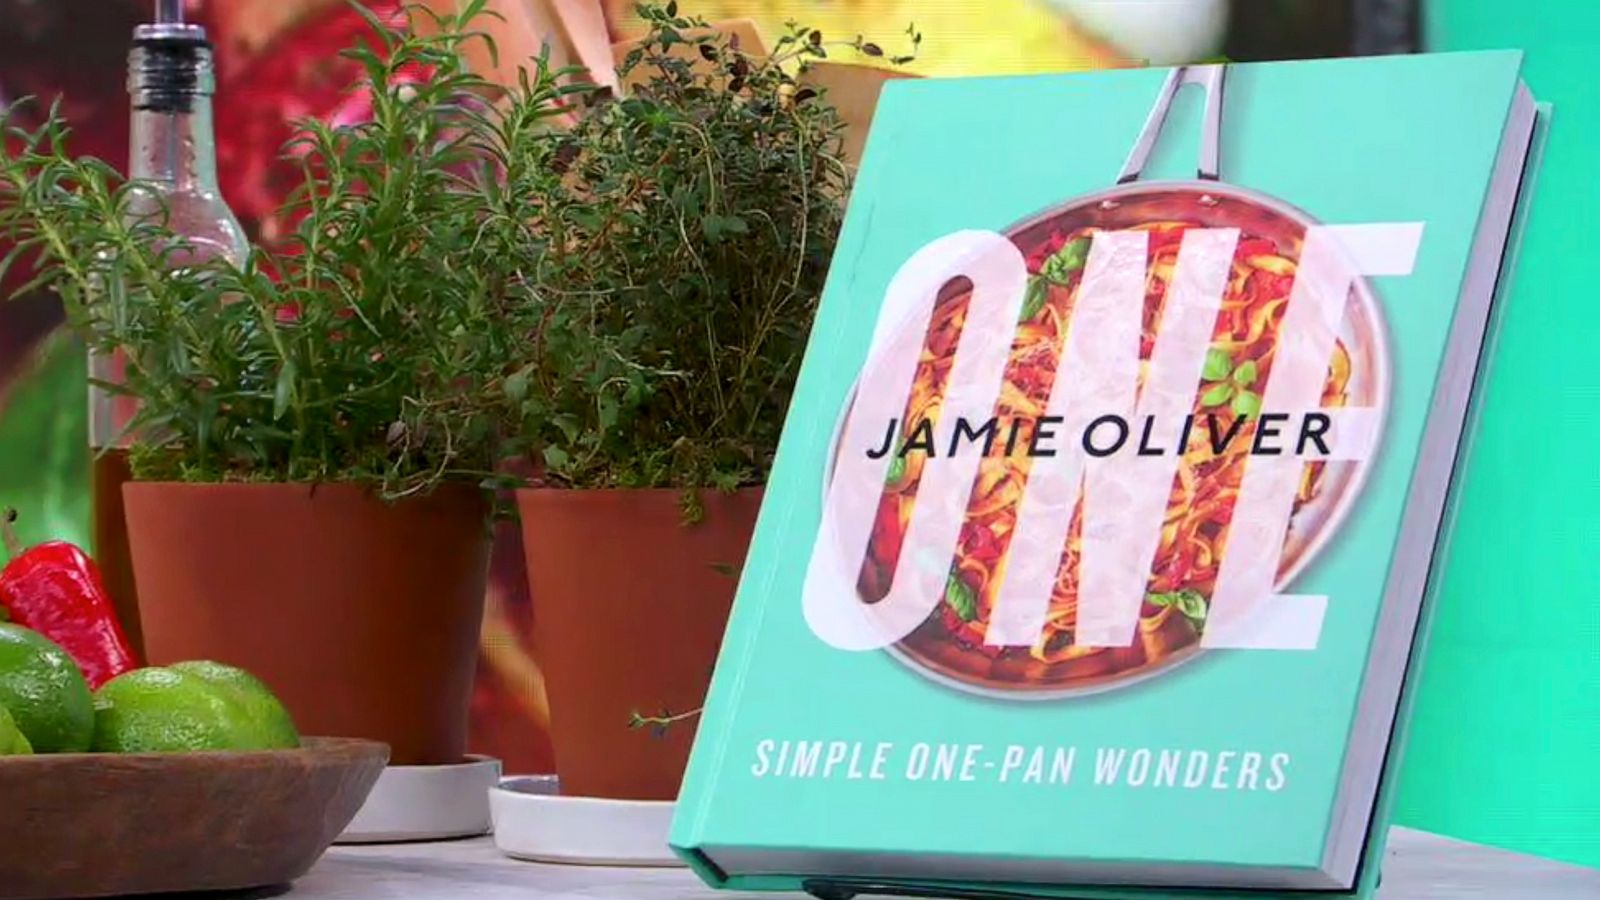 dictator Vergadering Geboorte geven Chef Jamie Oliver shares smoked pancetta and bean pasta recipe from  cookbook 'One: Simple One-Pan Wonders' - Good Morning America